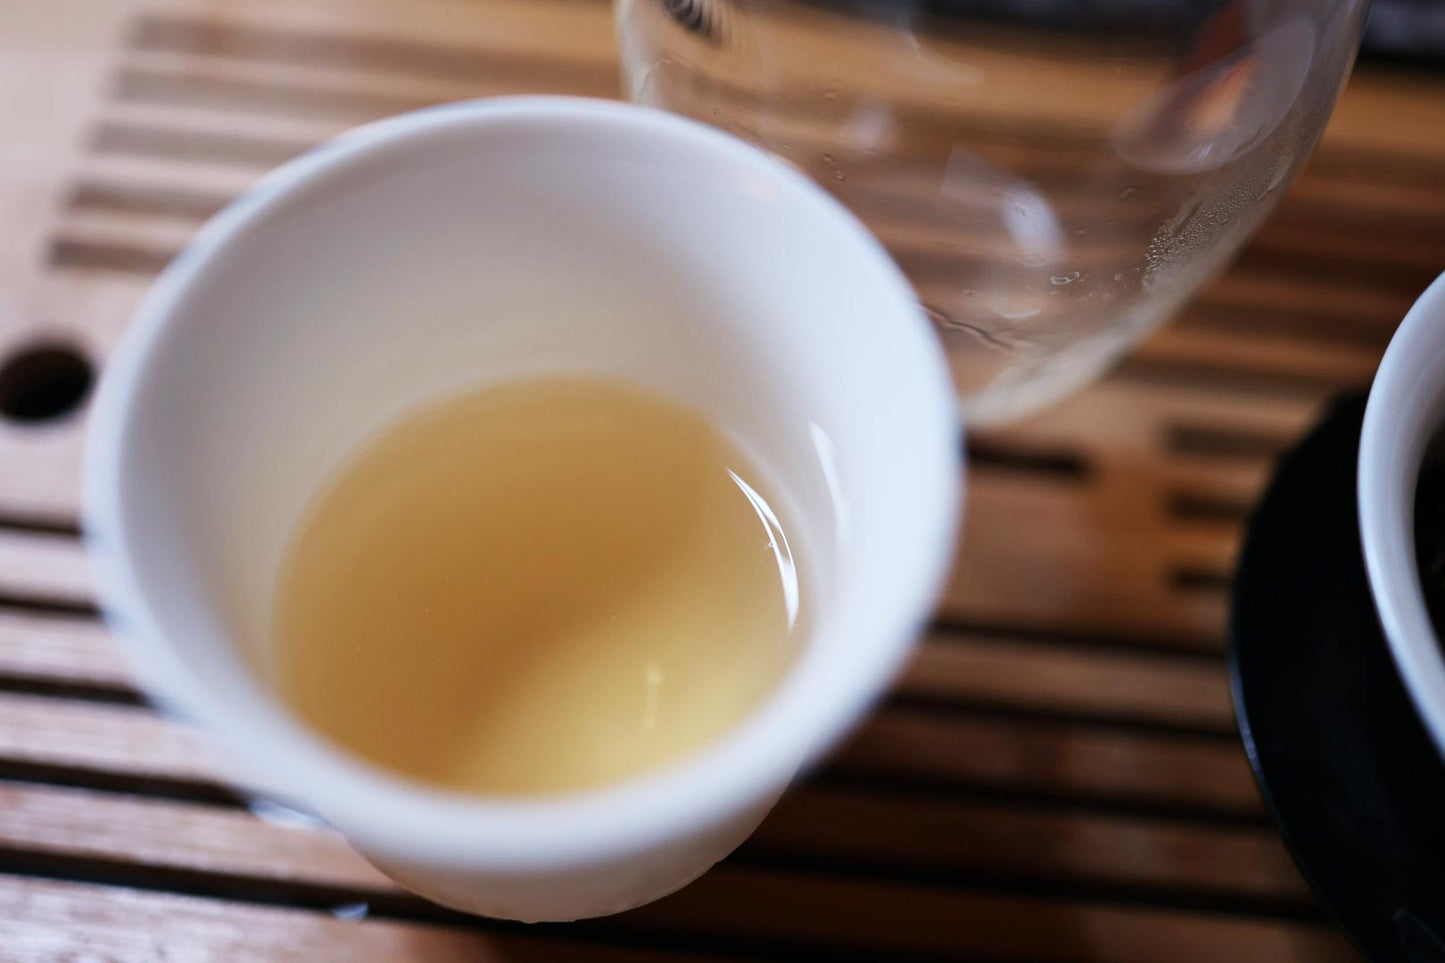 Ancient Tree Honey Orchid Dancong Oolong by Tea and Whisk - Lotus and Willow